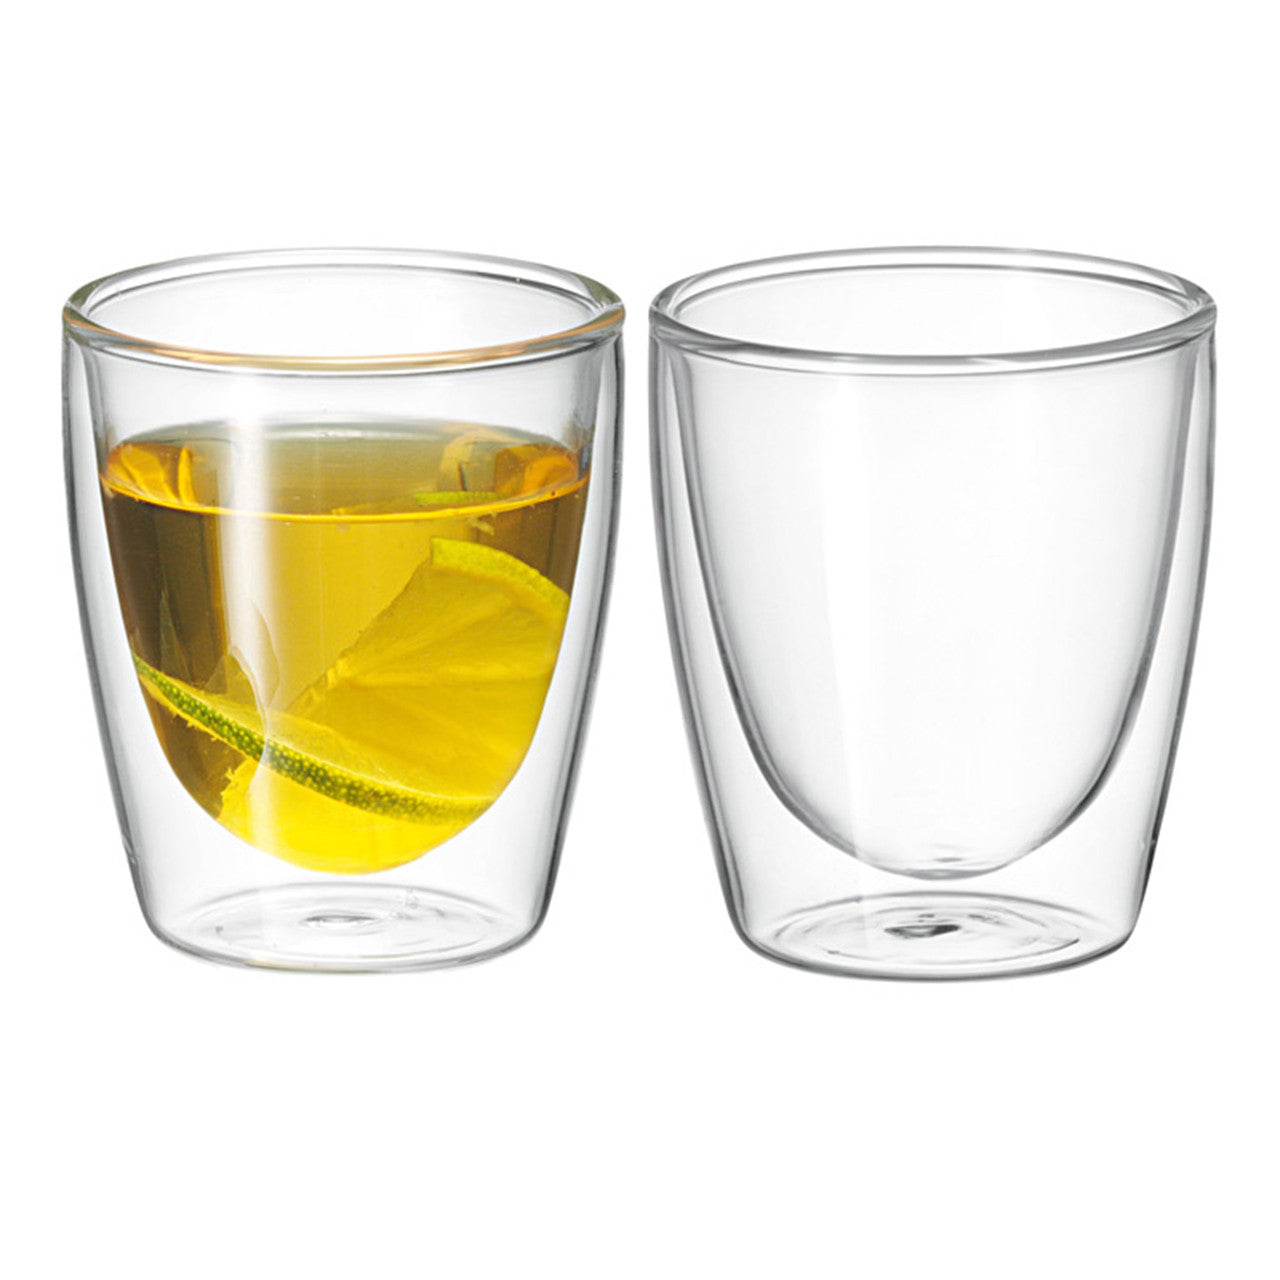 Caffe Double Wall Glass Set of 2